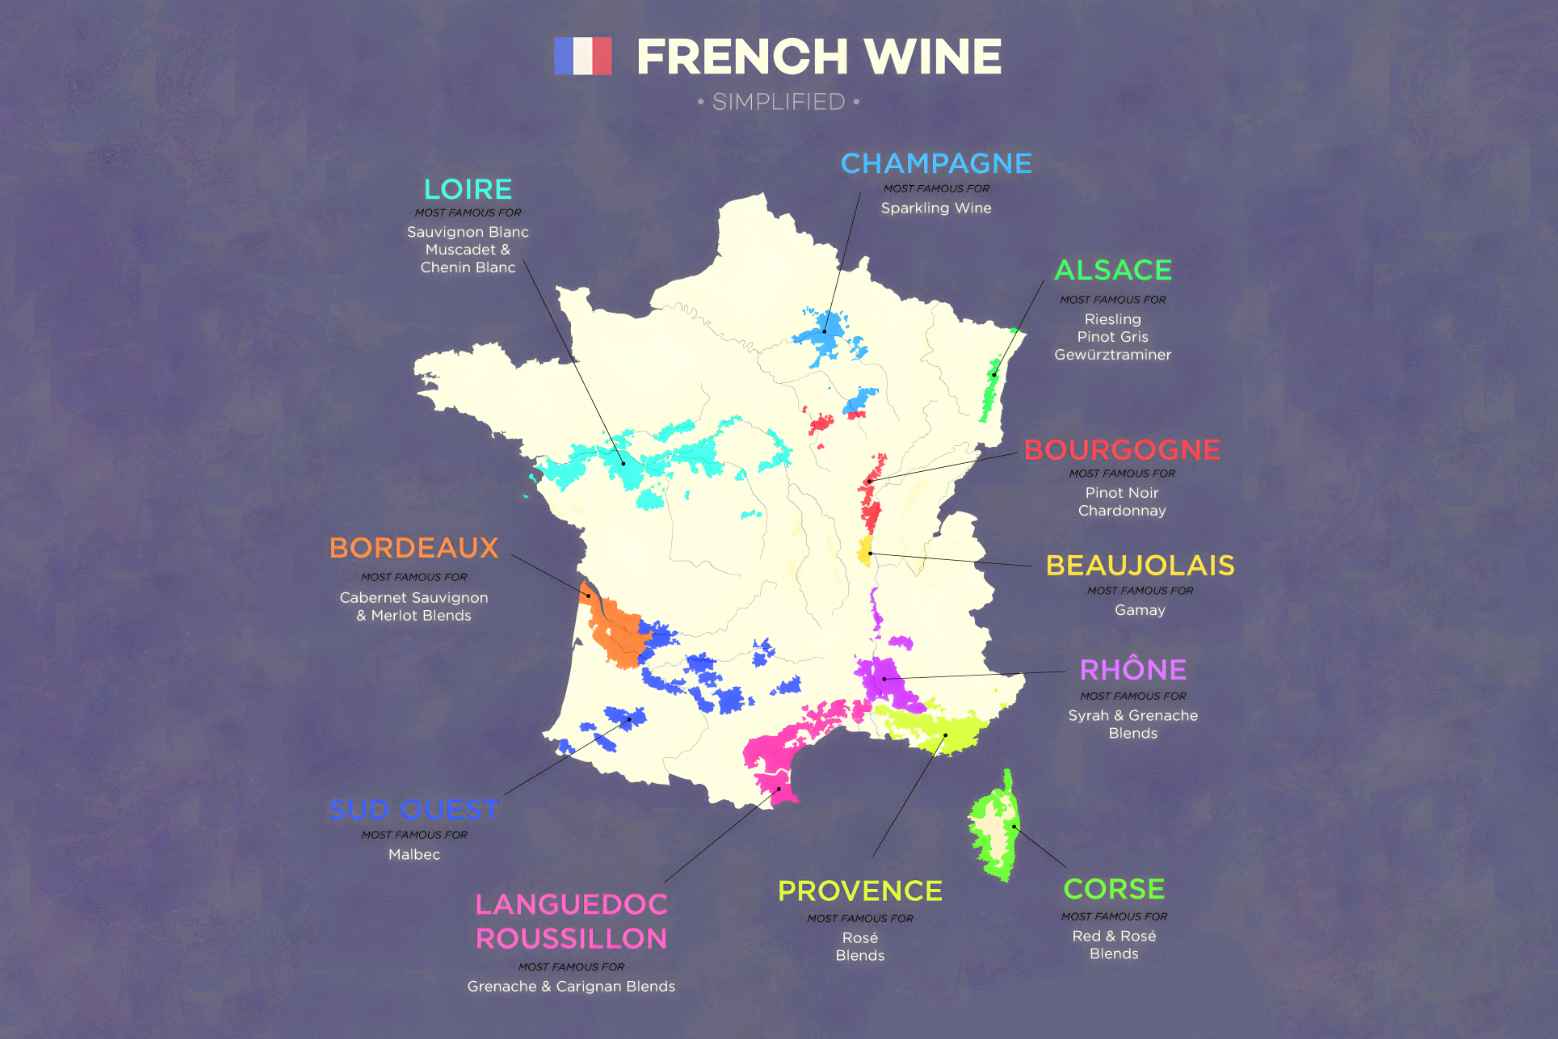 All About the French Wine Regions